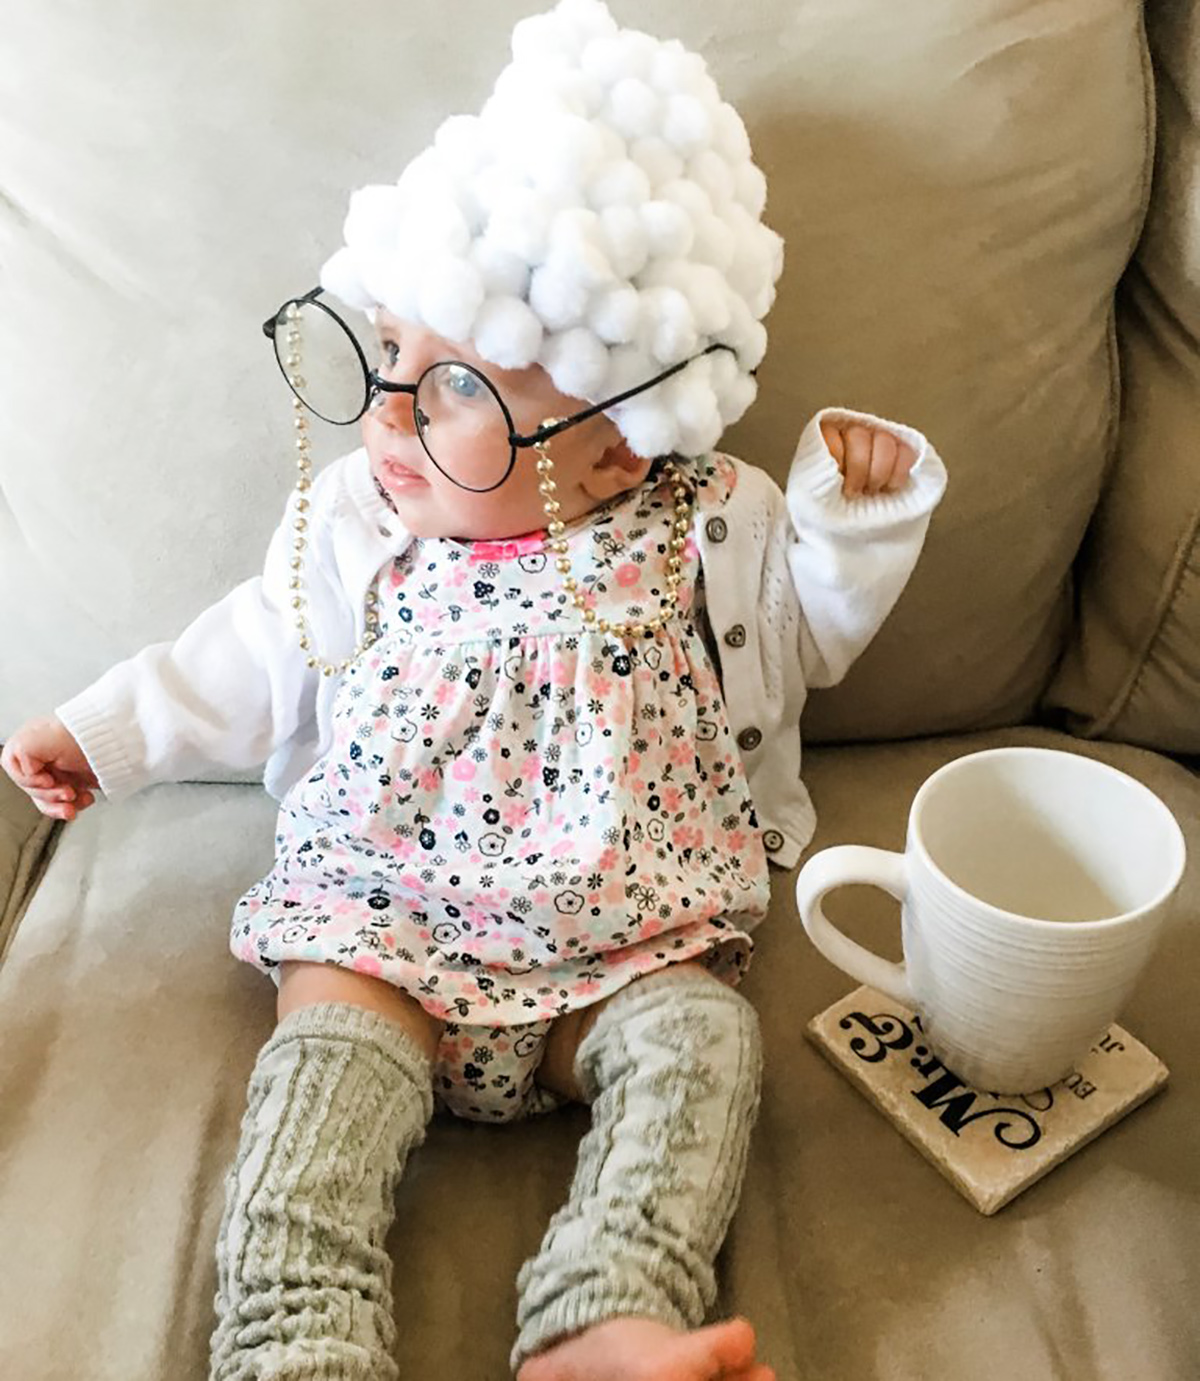 baby dressed in a DIY old lady costume for Halloween